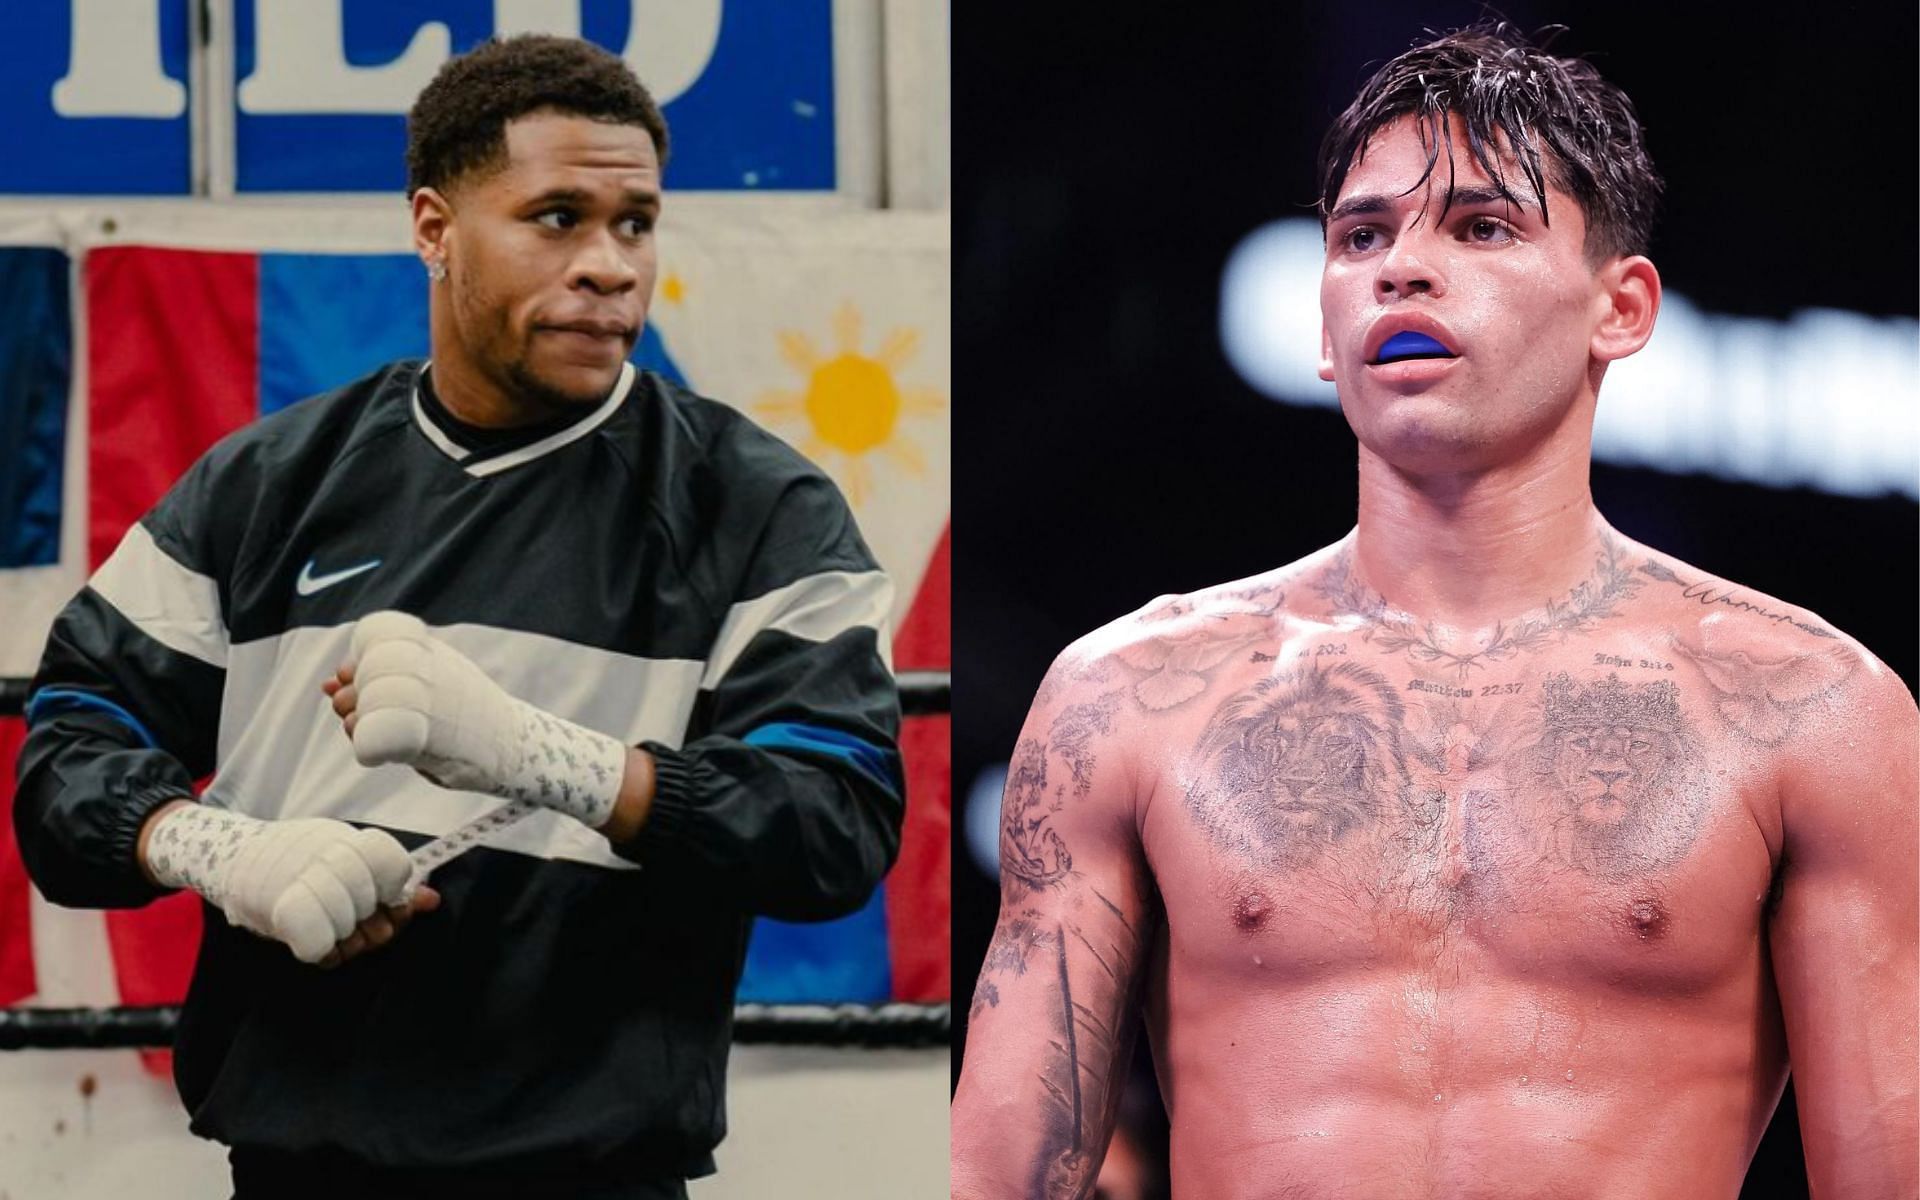 Devin Haney (left) is full of confidence that he will stop Ryan Garcia (right) early in their fight [Images Courtesy: @realdevinhaney on Instagram, @GettyImages]